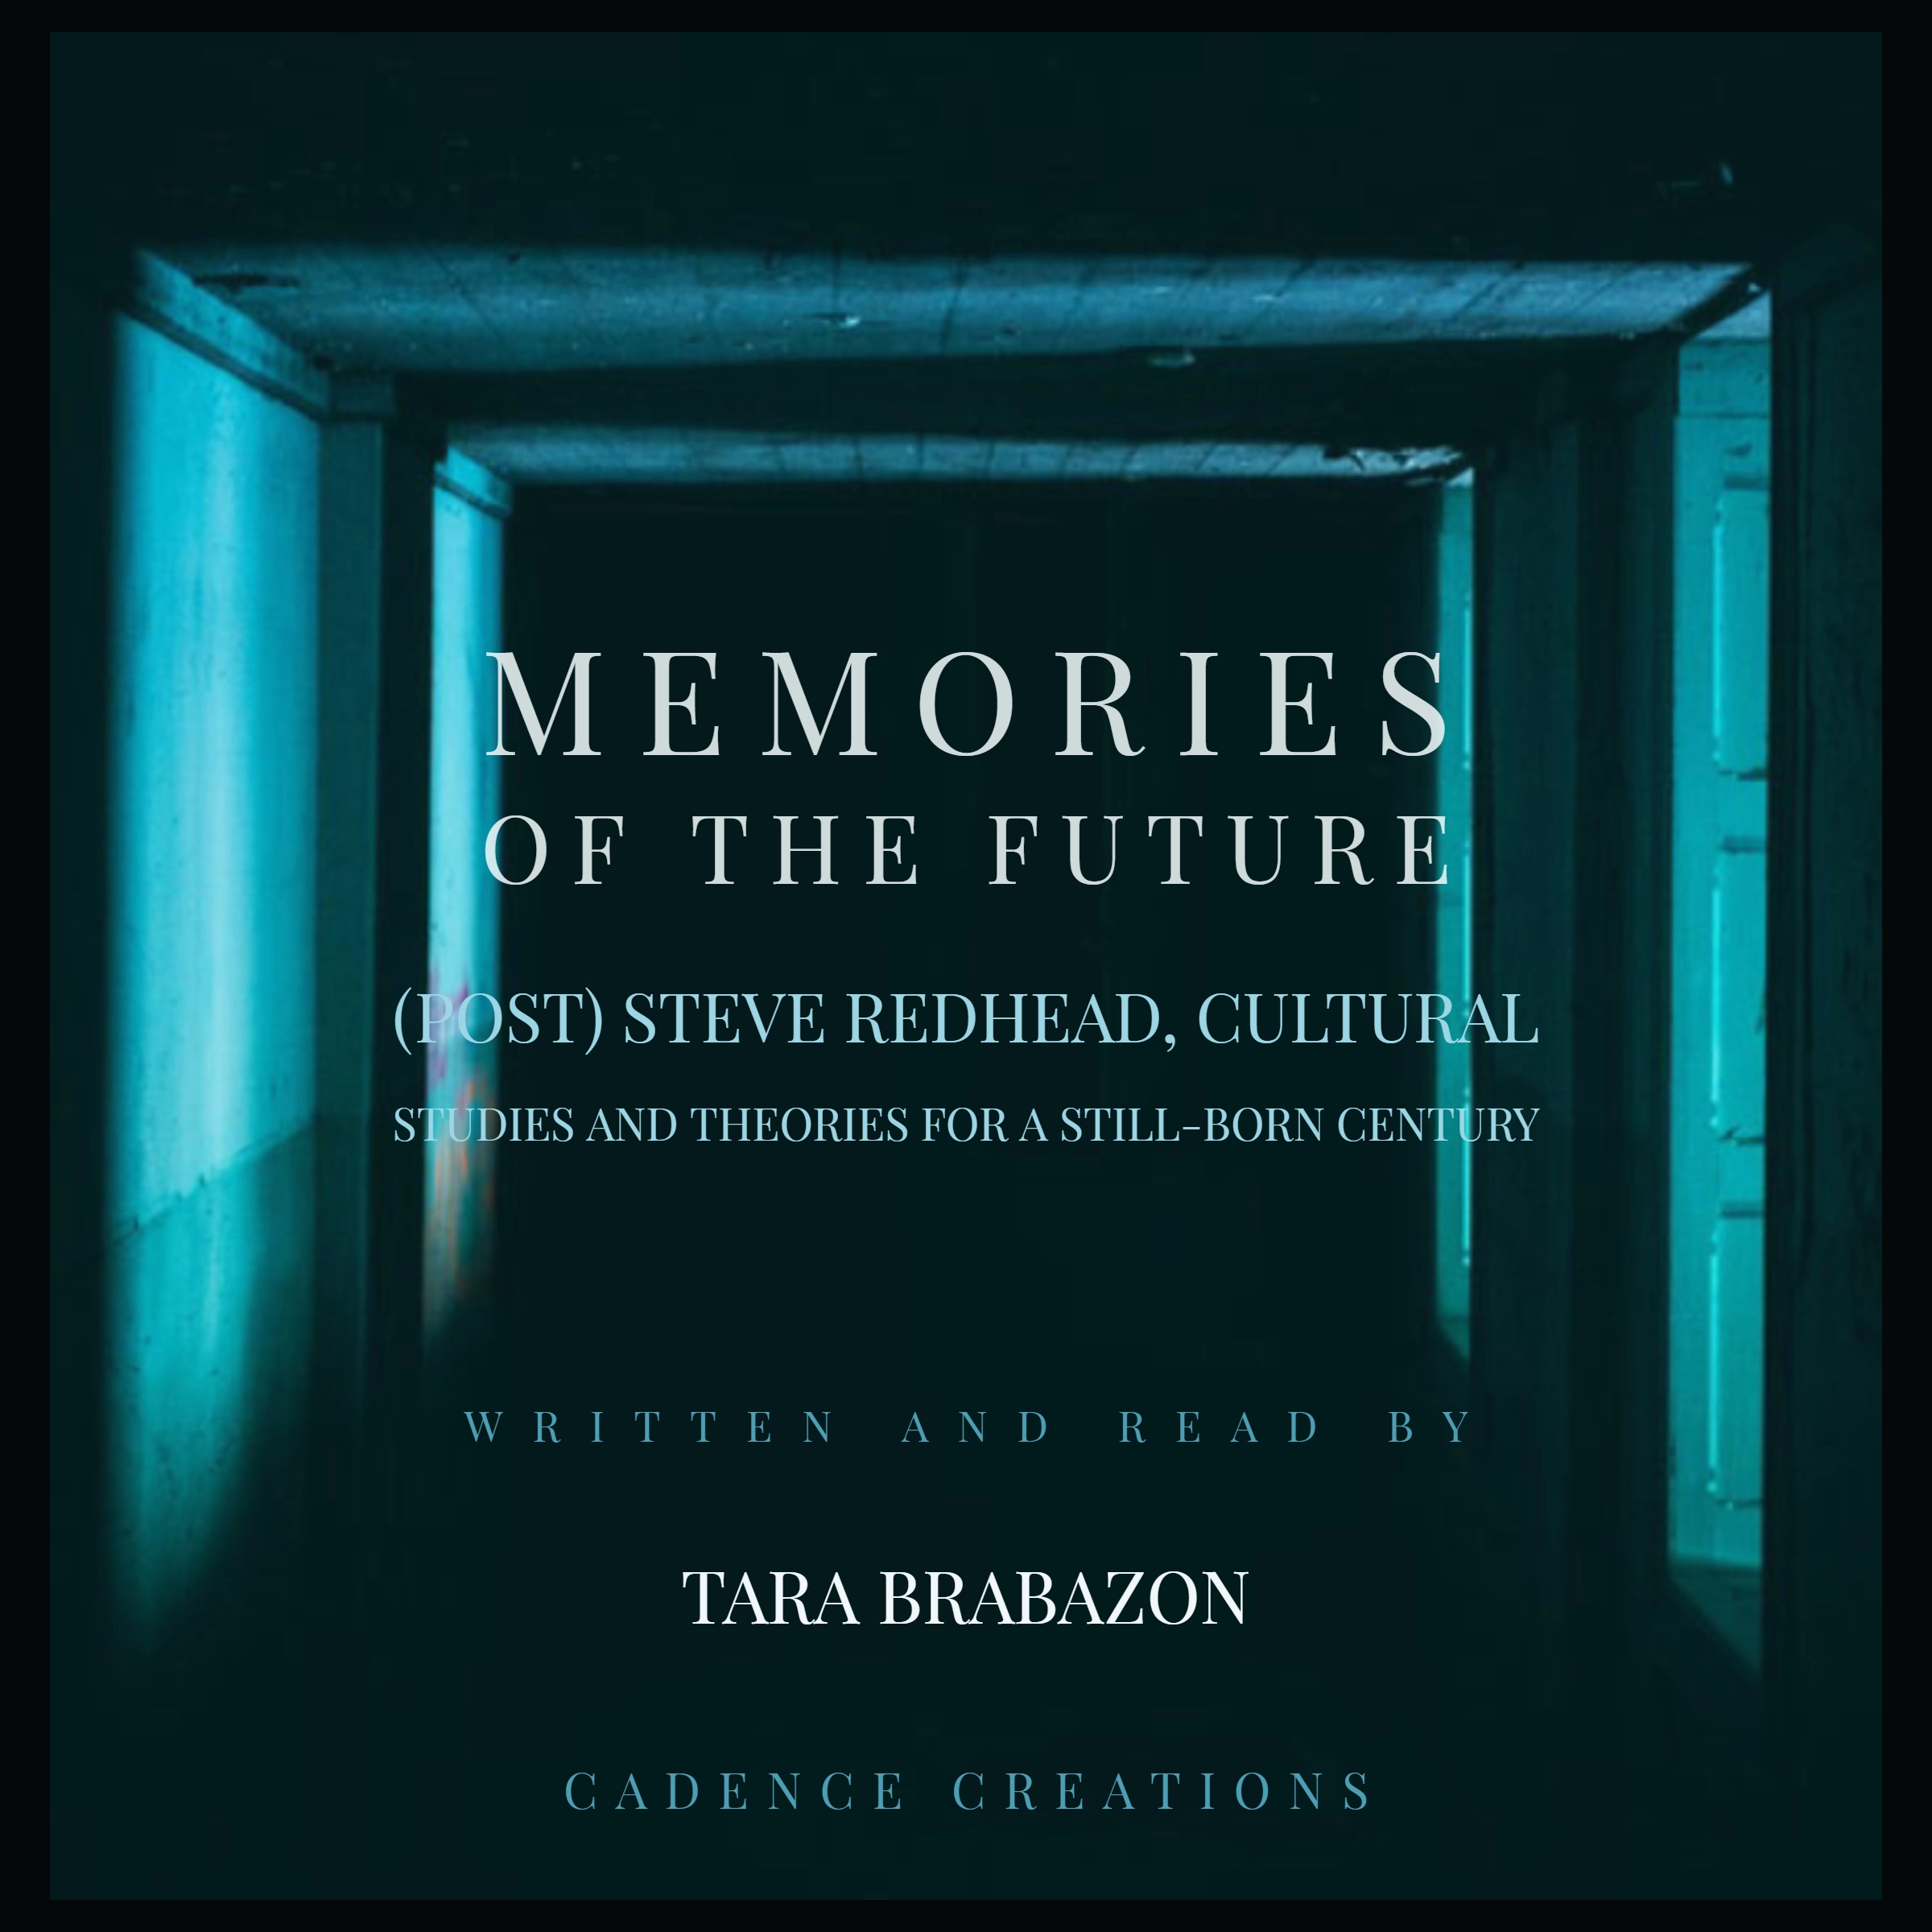 Memories of the Future:  (Post) Steve Redhead, Cultural Studies and theories for a still-born century Audiobook by Tara Brabazon